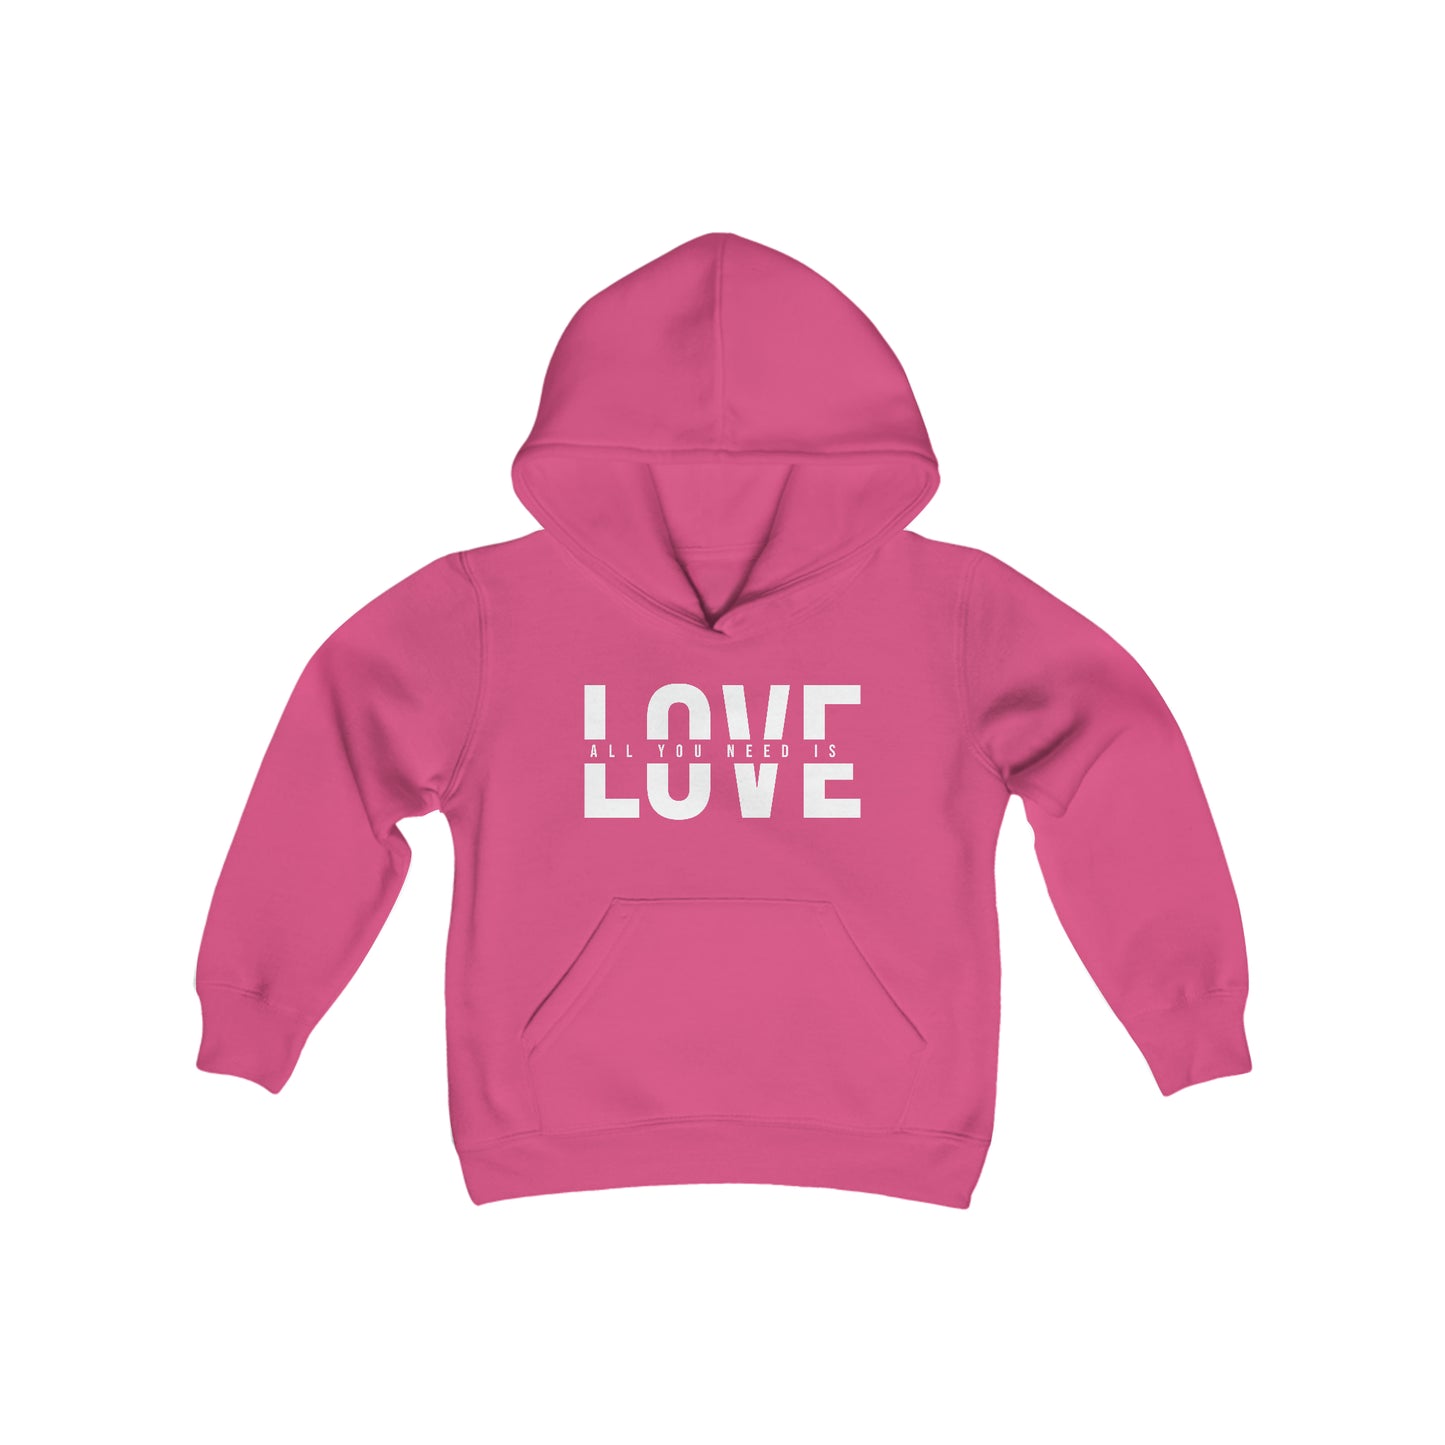 All You... LOVE - Youth Heavy Blend Hooded Sweatshirt